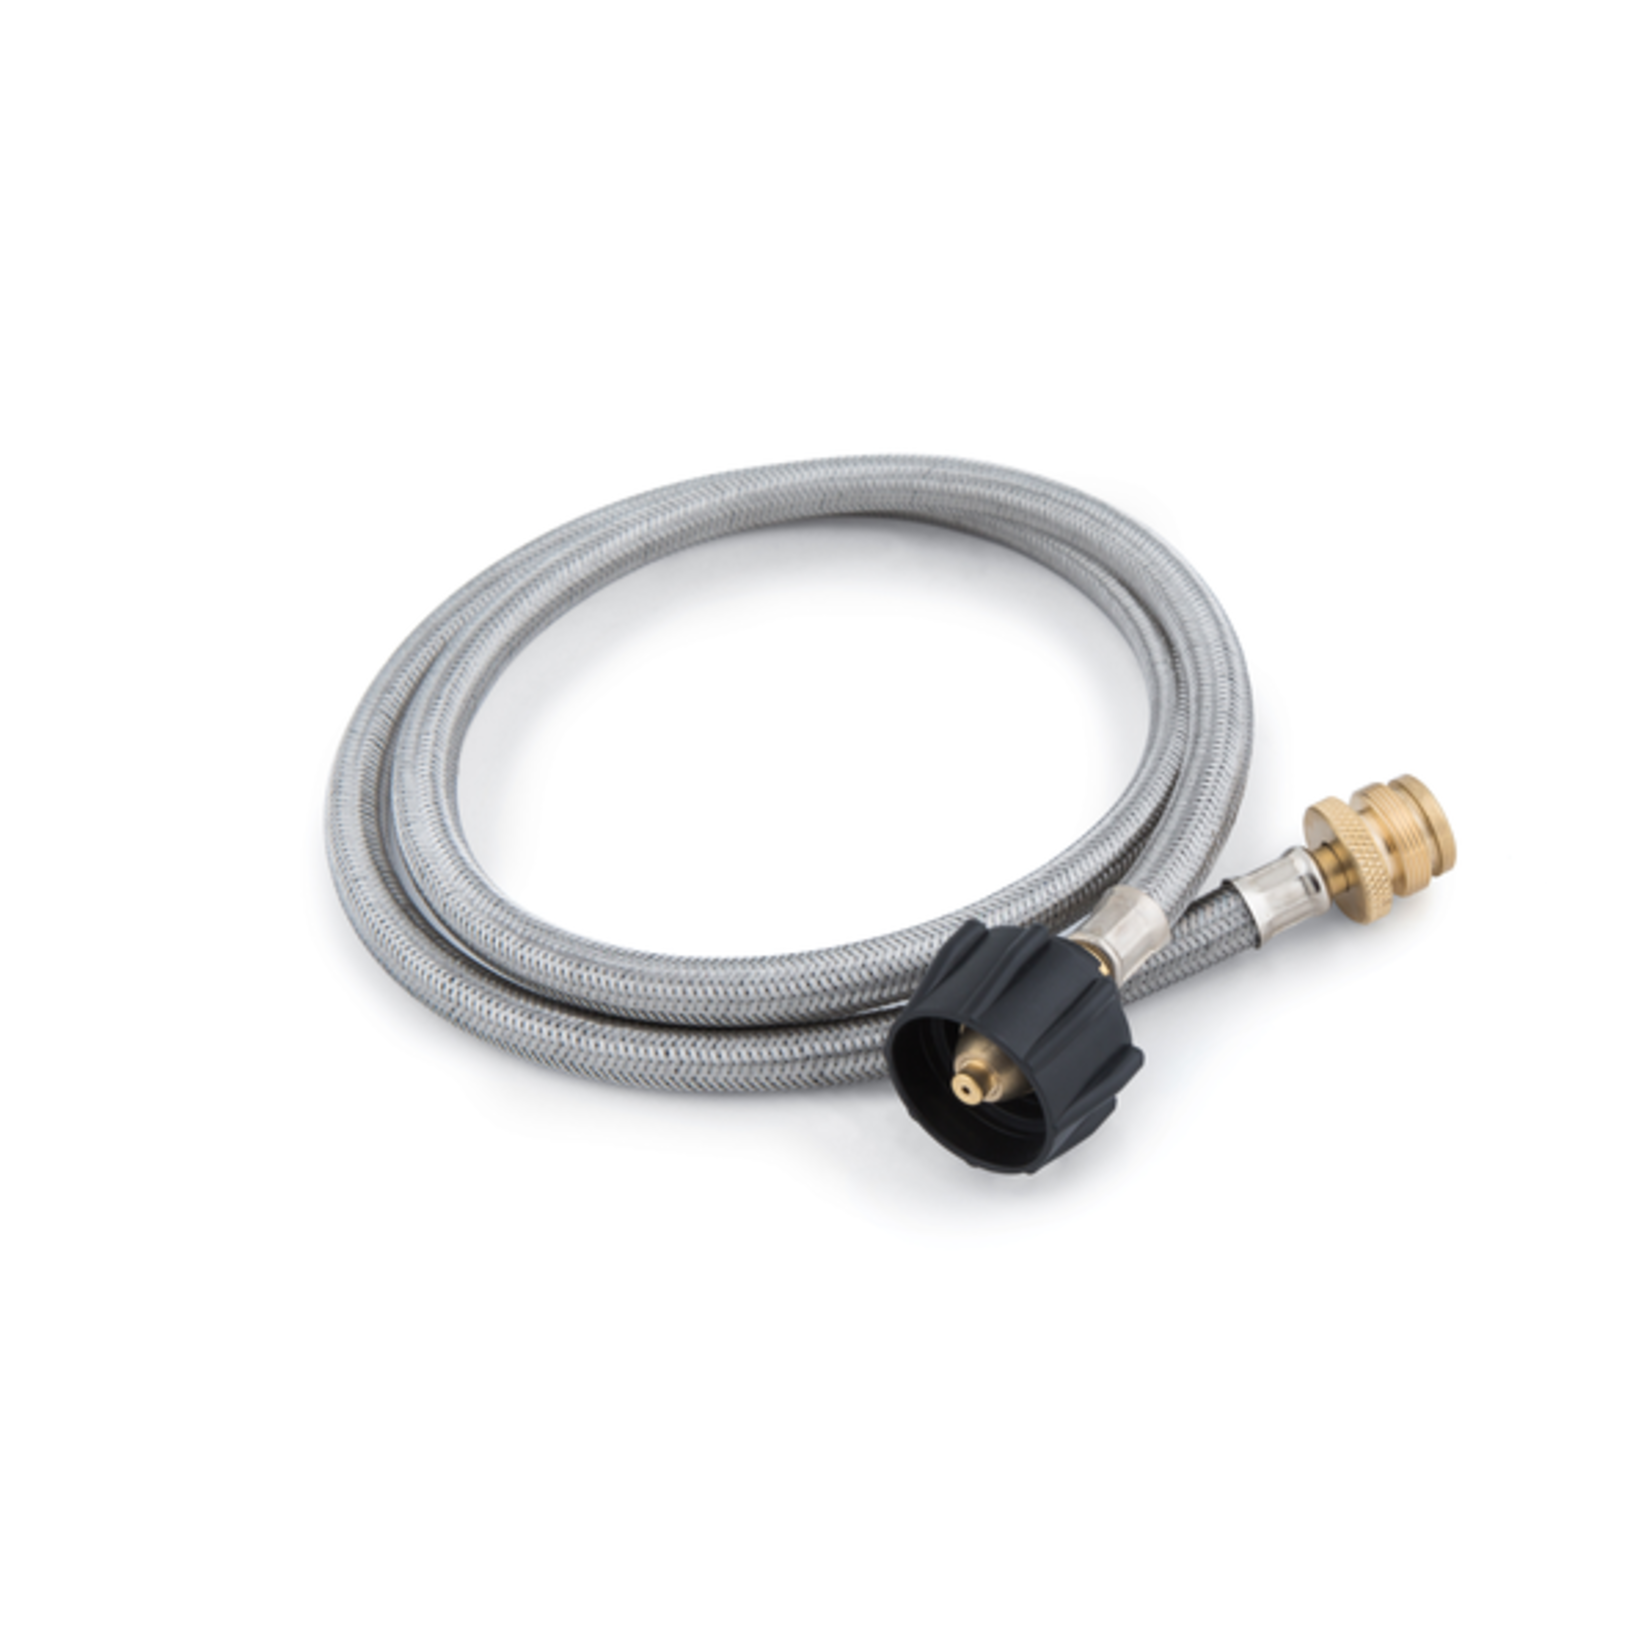 Broil King Hose - 4-Ft Adapter - SS Braid